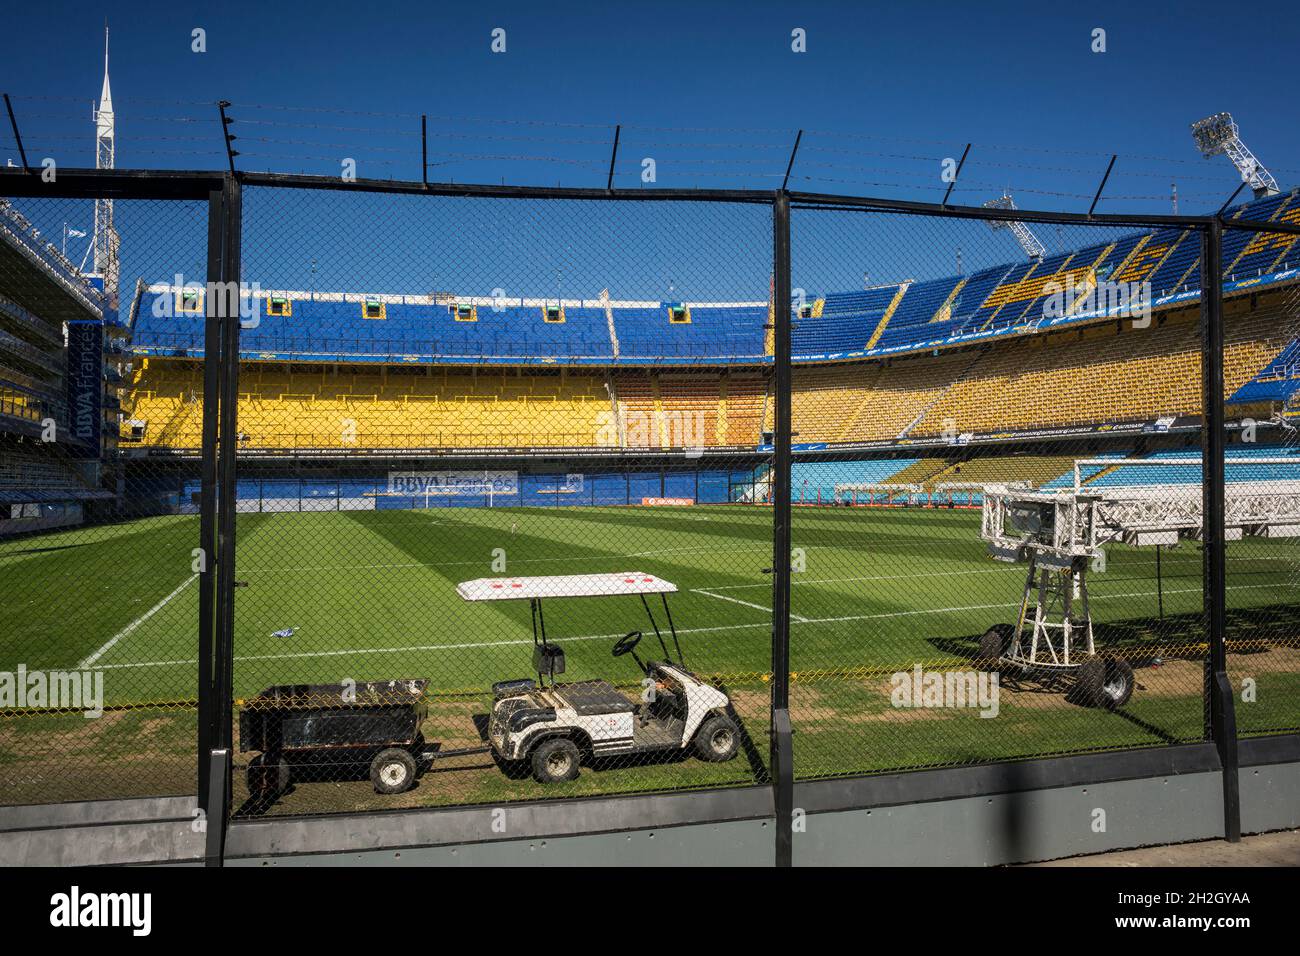 Horizontal view of La Bombonera (Boca Juniors soccer field) from the local supporters’ location, behind the reinforcing mess, in La Boca, Buenos Aires Stock Photo